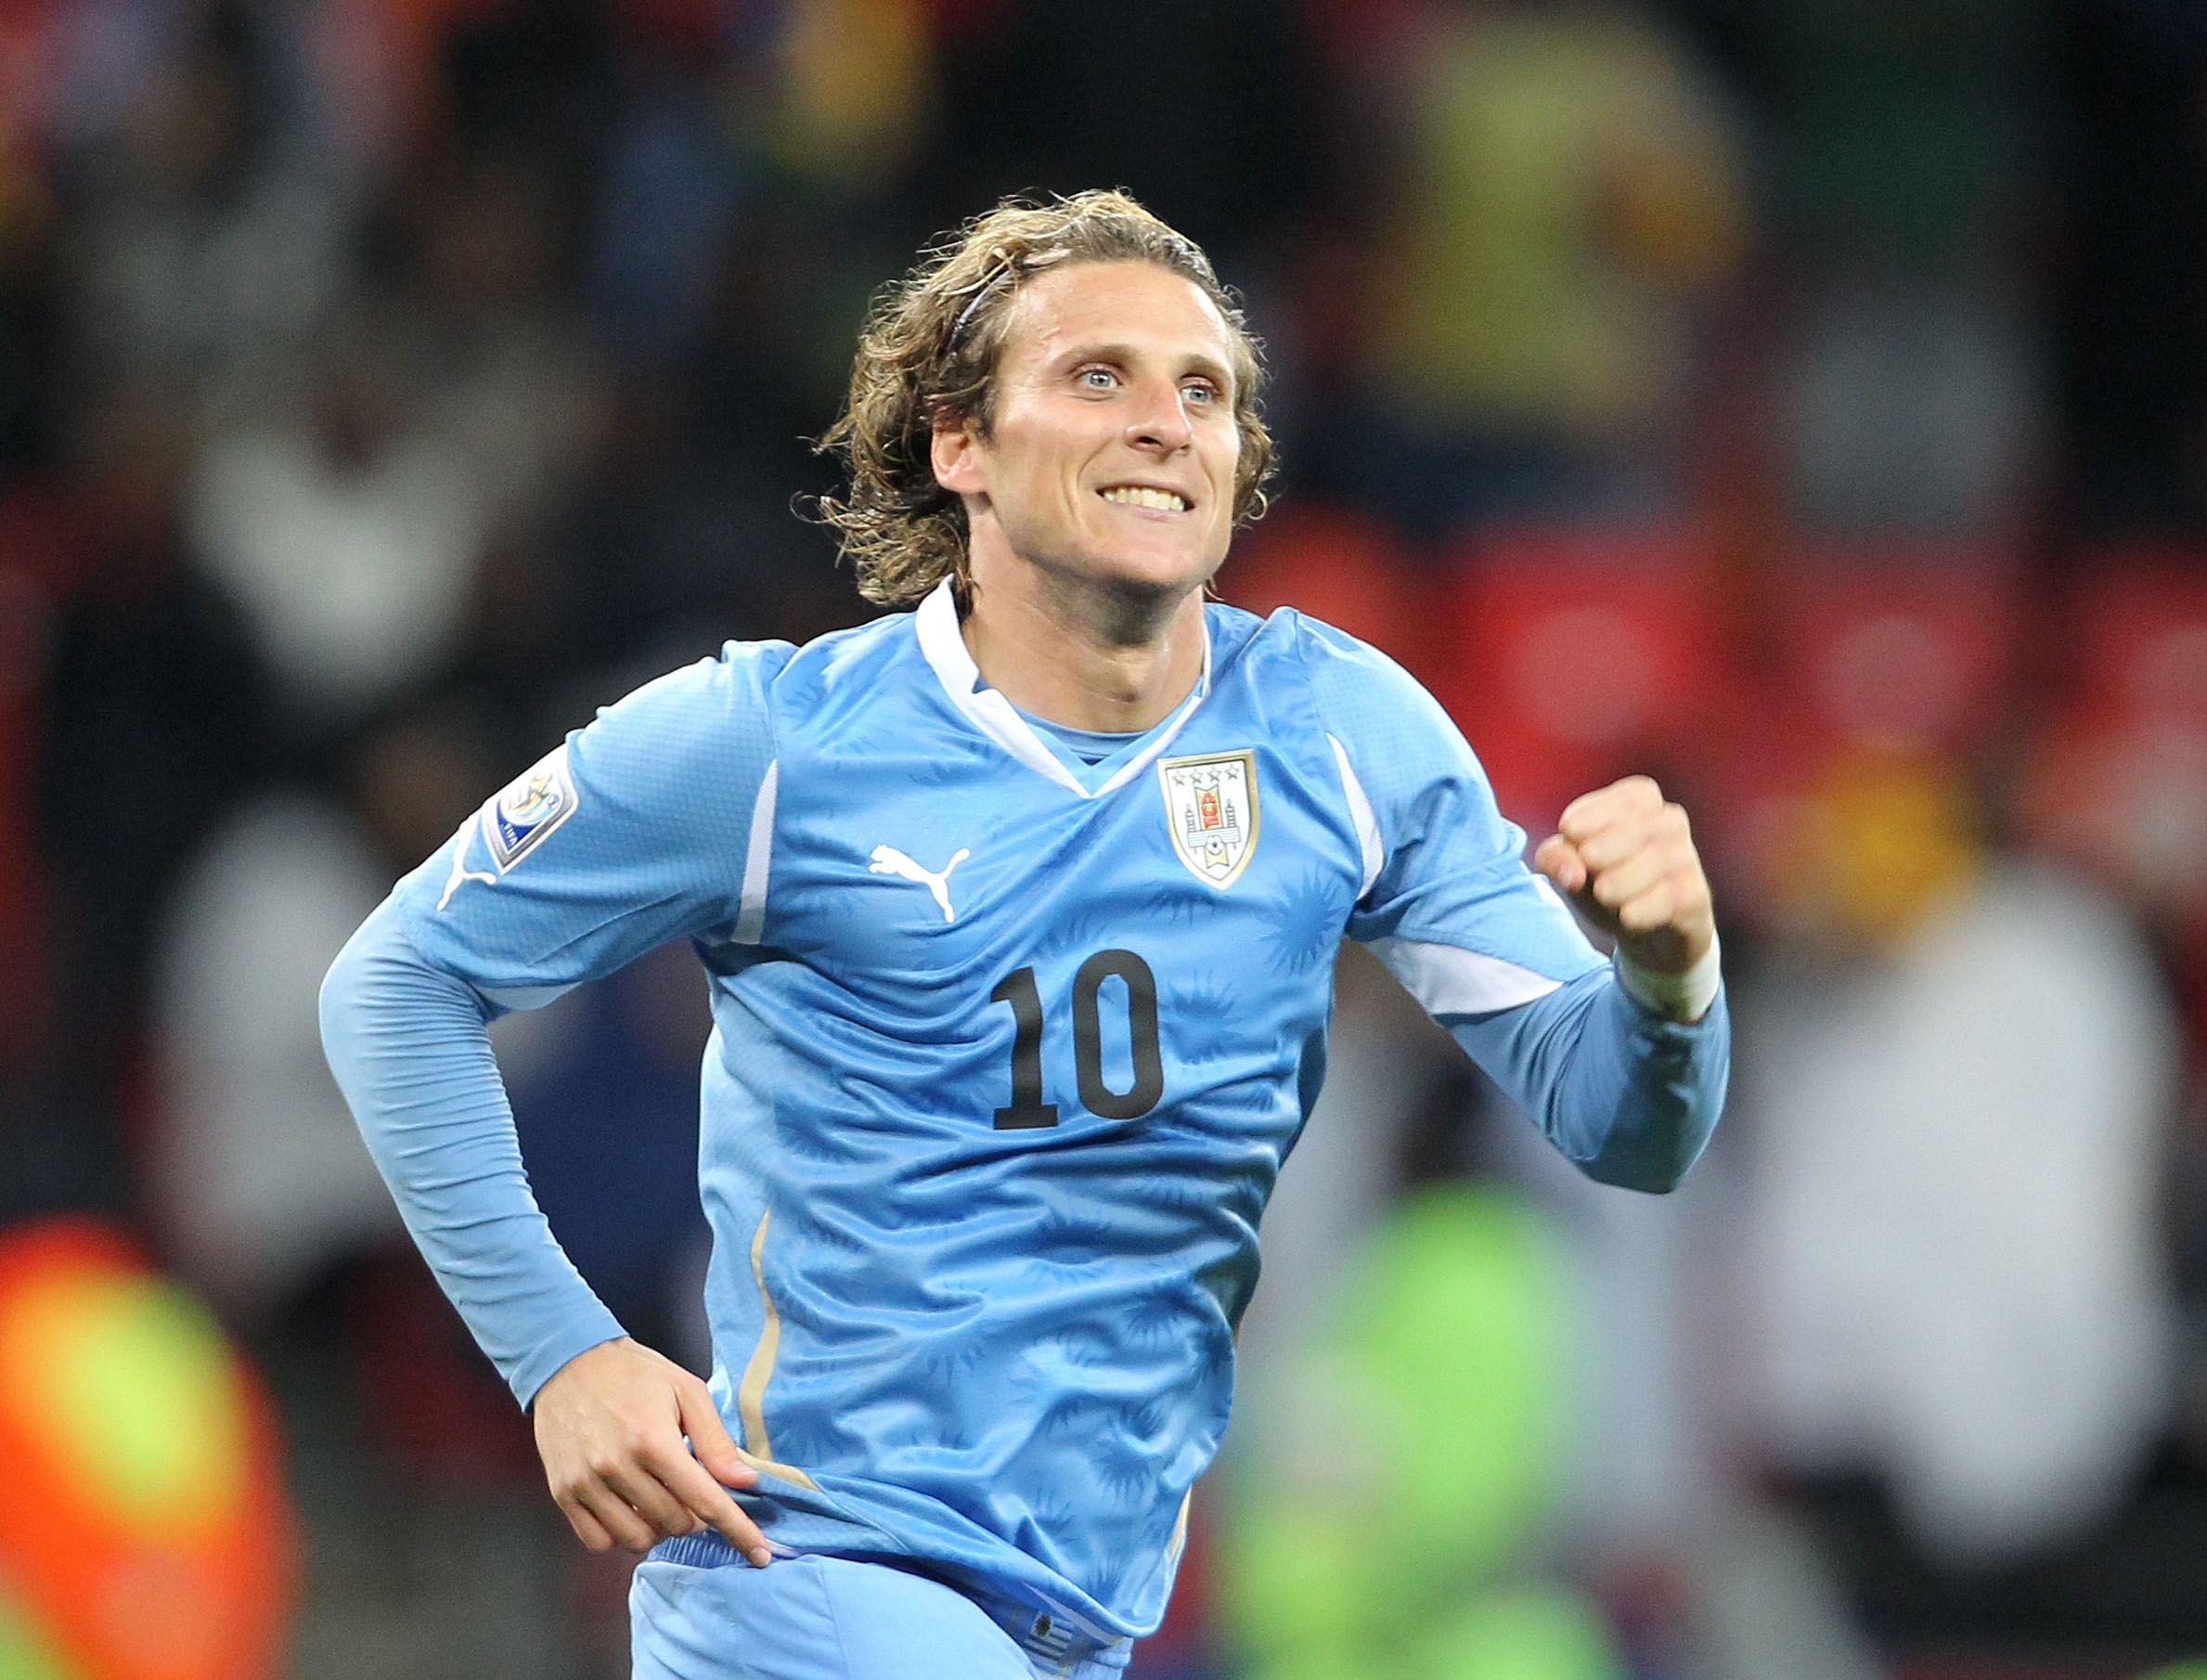 Football - Uruguay v Germany FIFA World Cup Third/Fourth Place Play-Off - South Africa 2010  - Nelson Mandela Bay Stadium, Port Elizabeth, South Africa - 10/7/10 
Uruguay's Diego Forlan celebrates scoring the second goal  
Mandatory Credit: Action Images / Matthew Childs 
Livepic